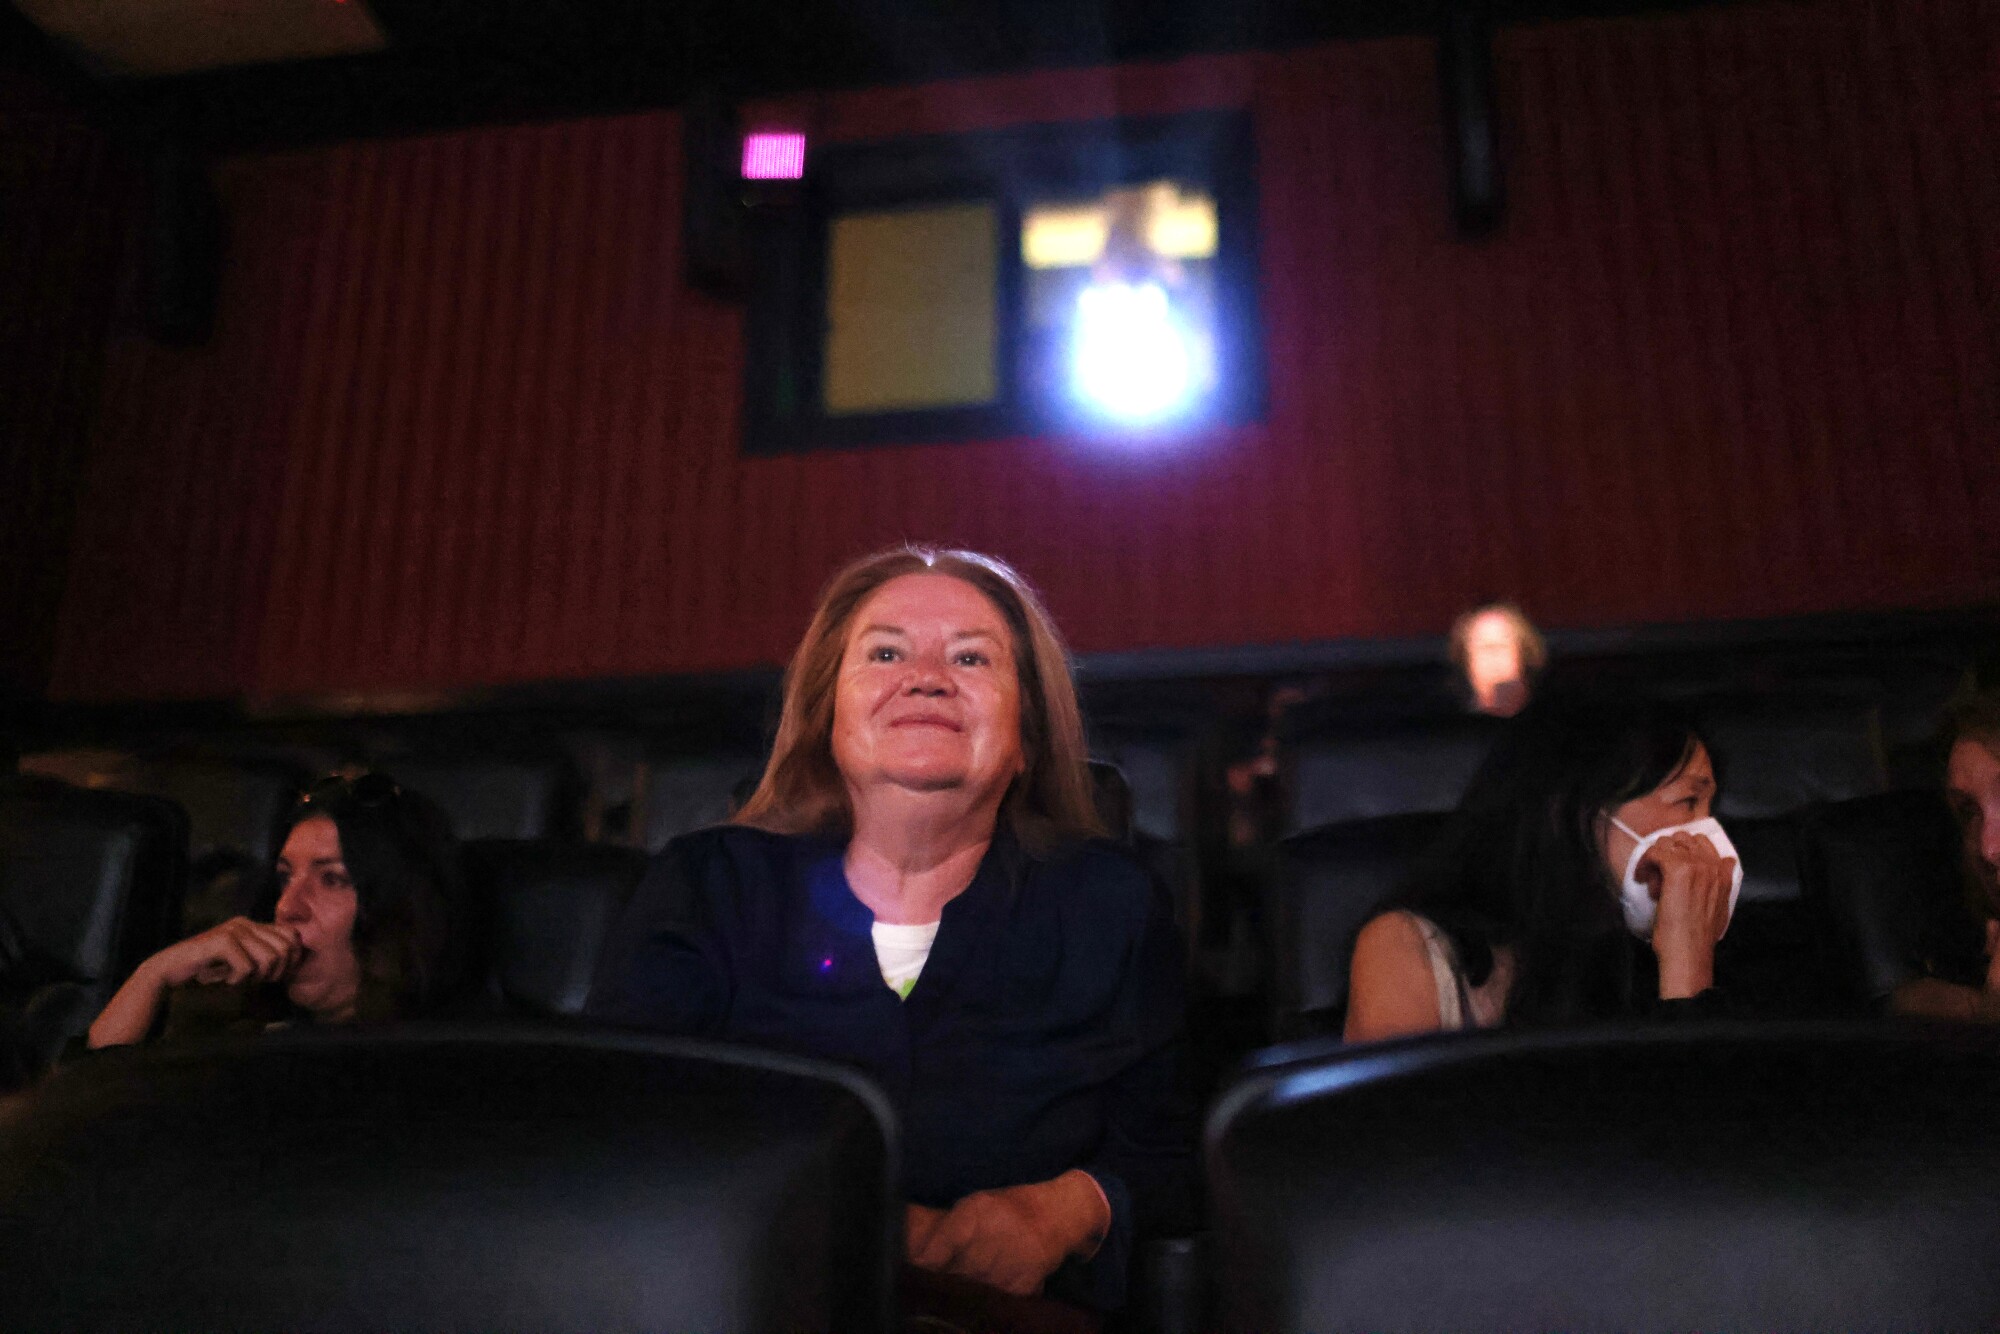 A woman smiles in a movie theater